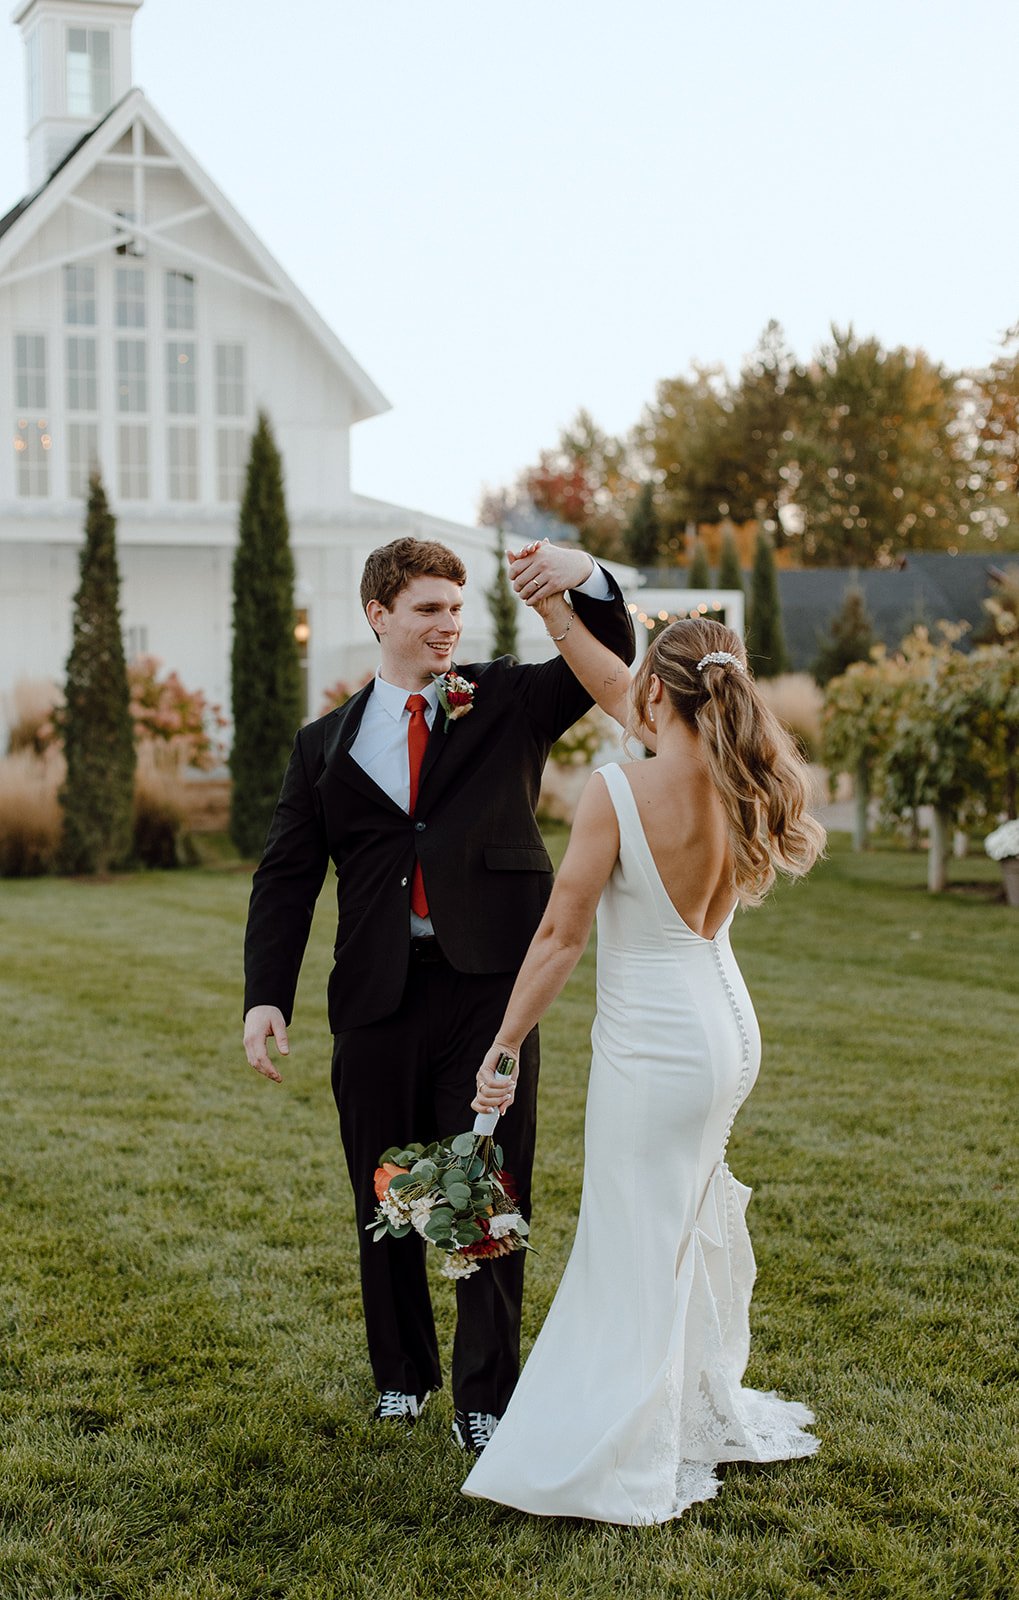  “We could not have made a better decision than to work with Lily. She was so very helpful throughout the entire wedding planning process and was the most amazing go-to person on the day of our wedding. Lily was my go-to for everything wedding!”  Lau